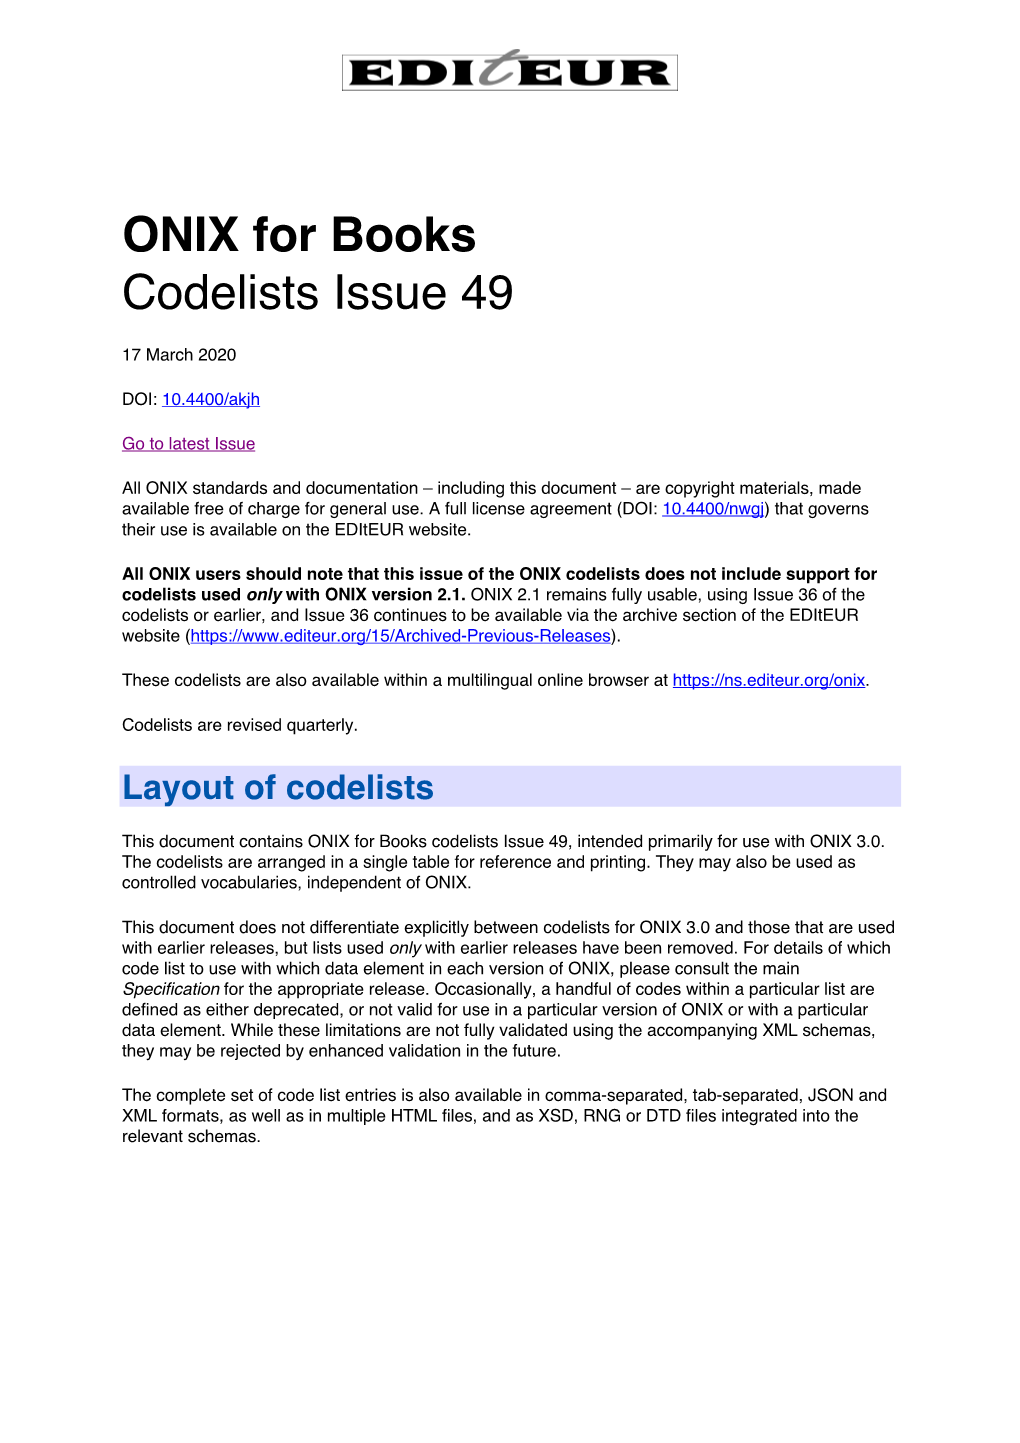 ONIX for Books Codelists Issue 49